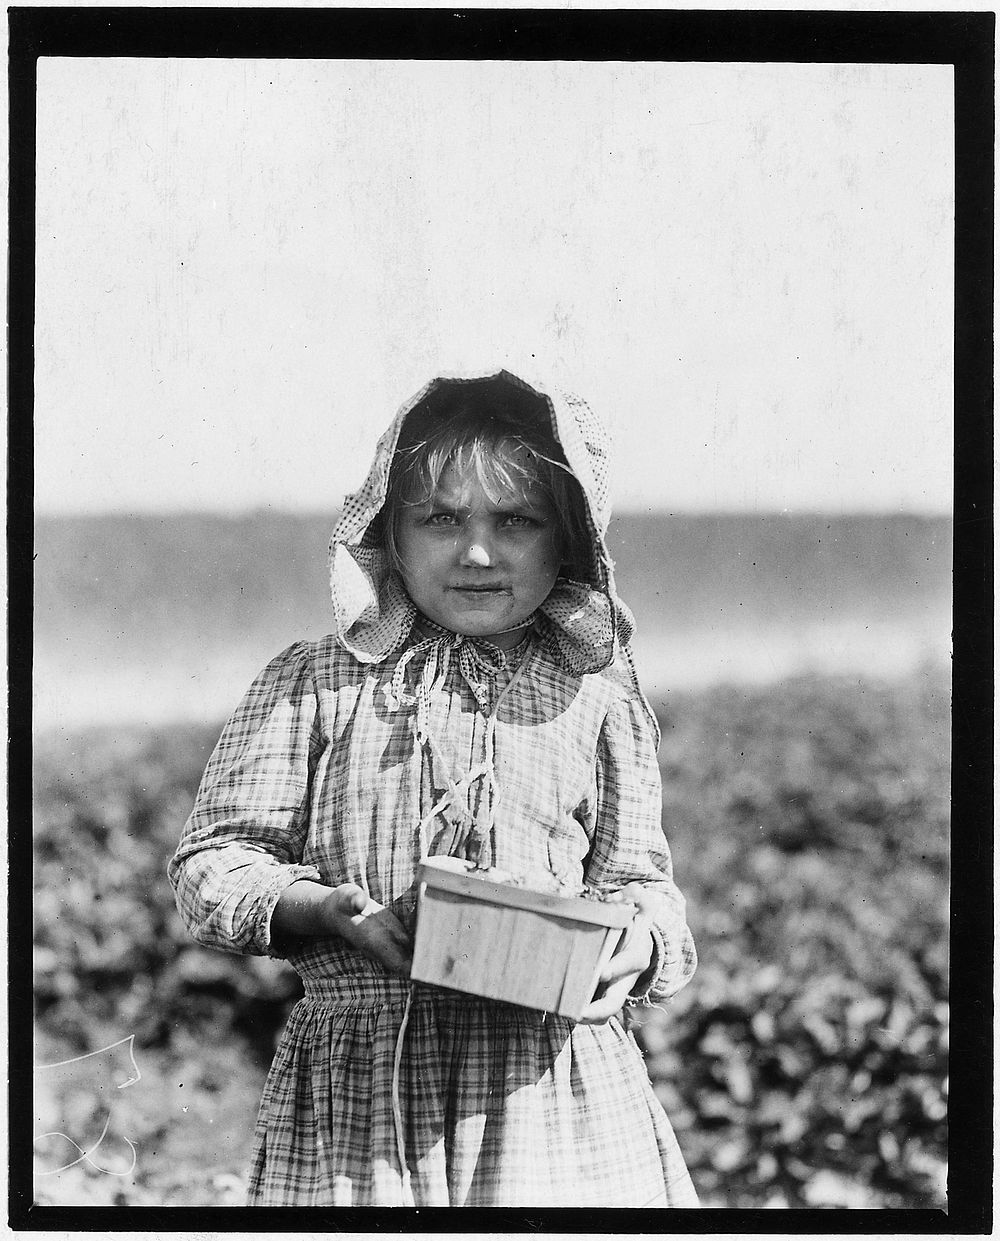 Alberta Mc Nadd on Chester Truitt's Farm, May 1910. Photographer: Hine, Lewis. Original public domain image from Flickr